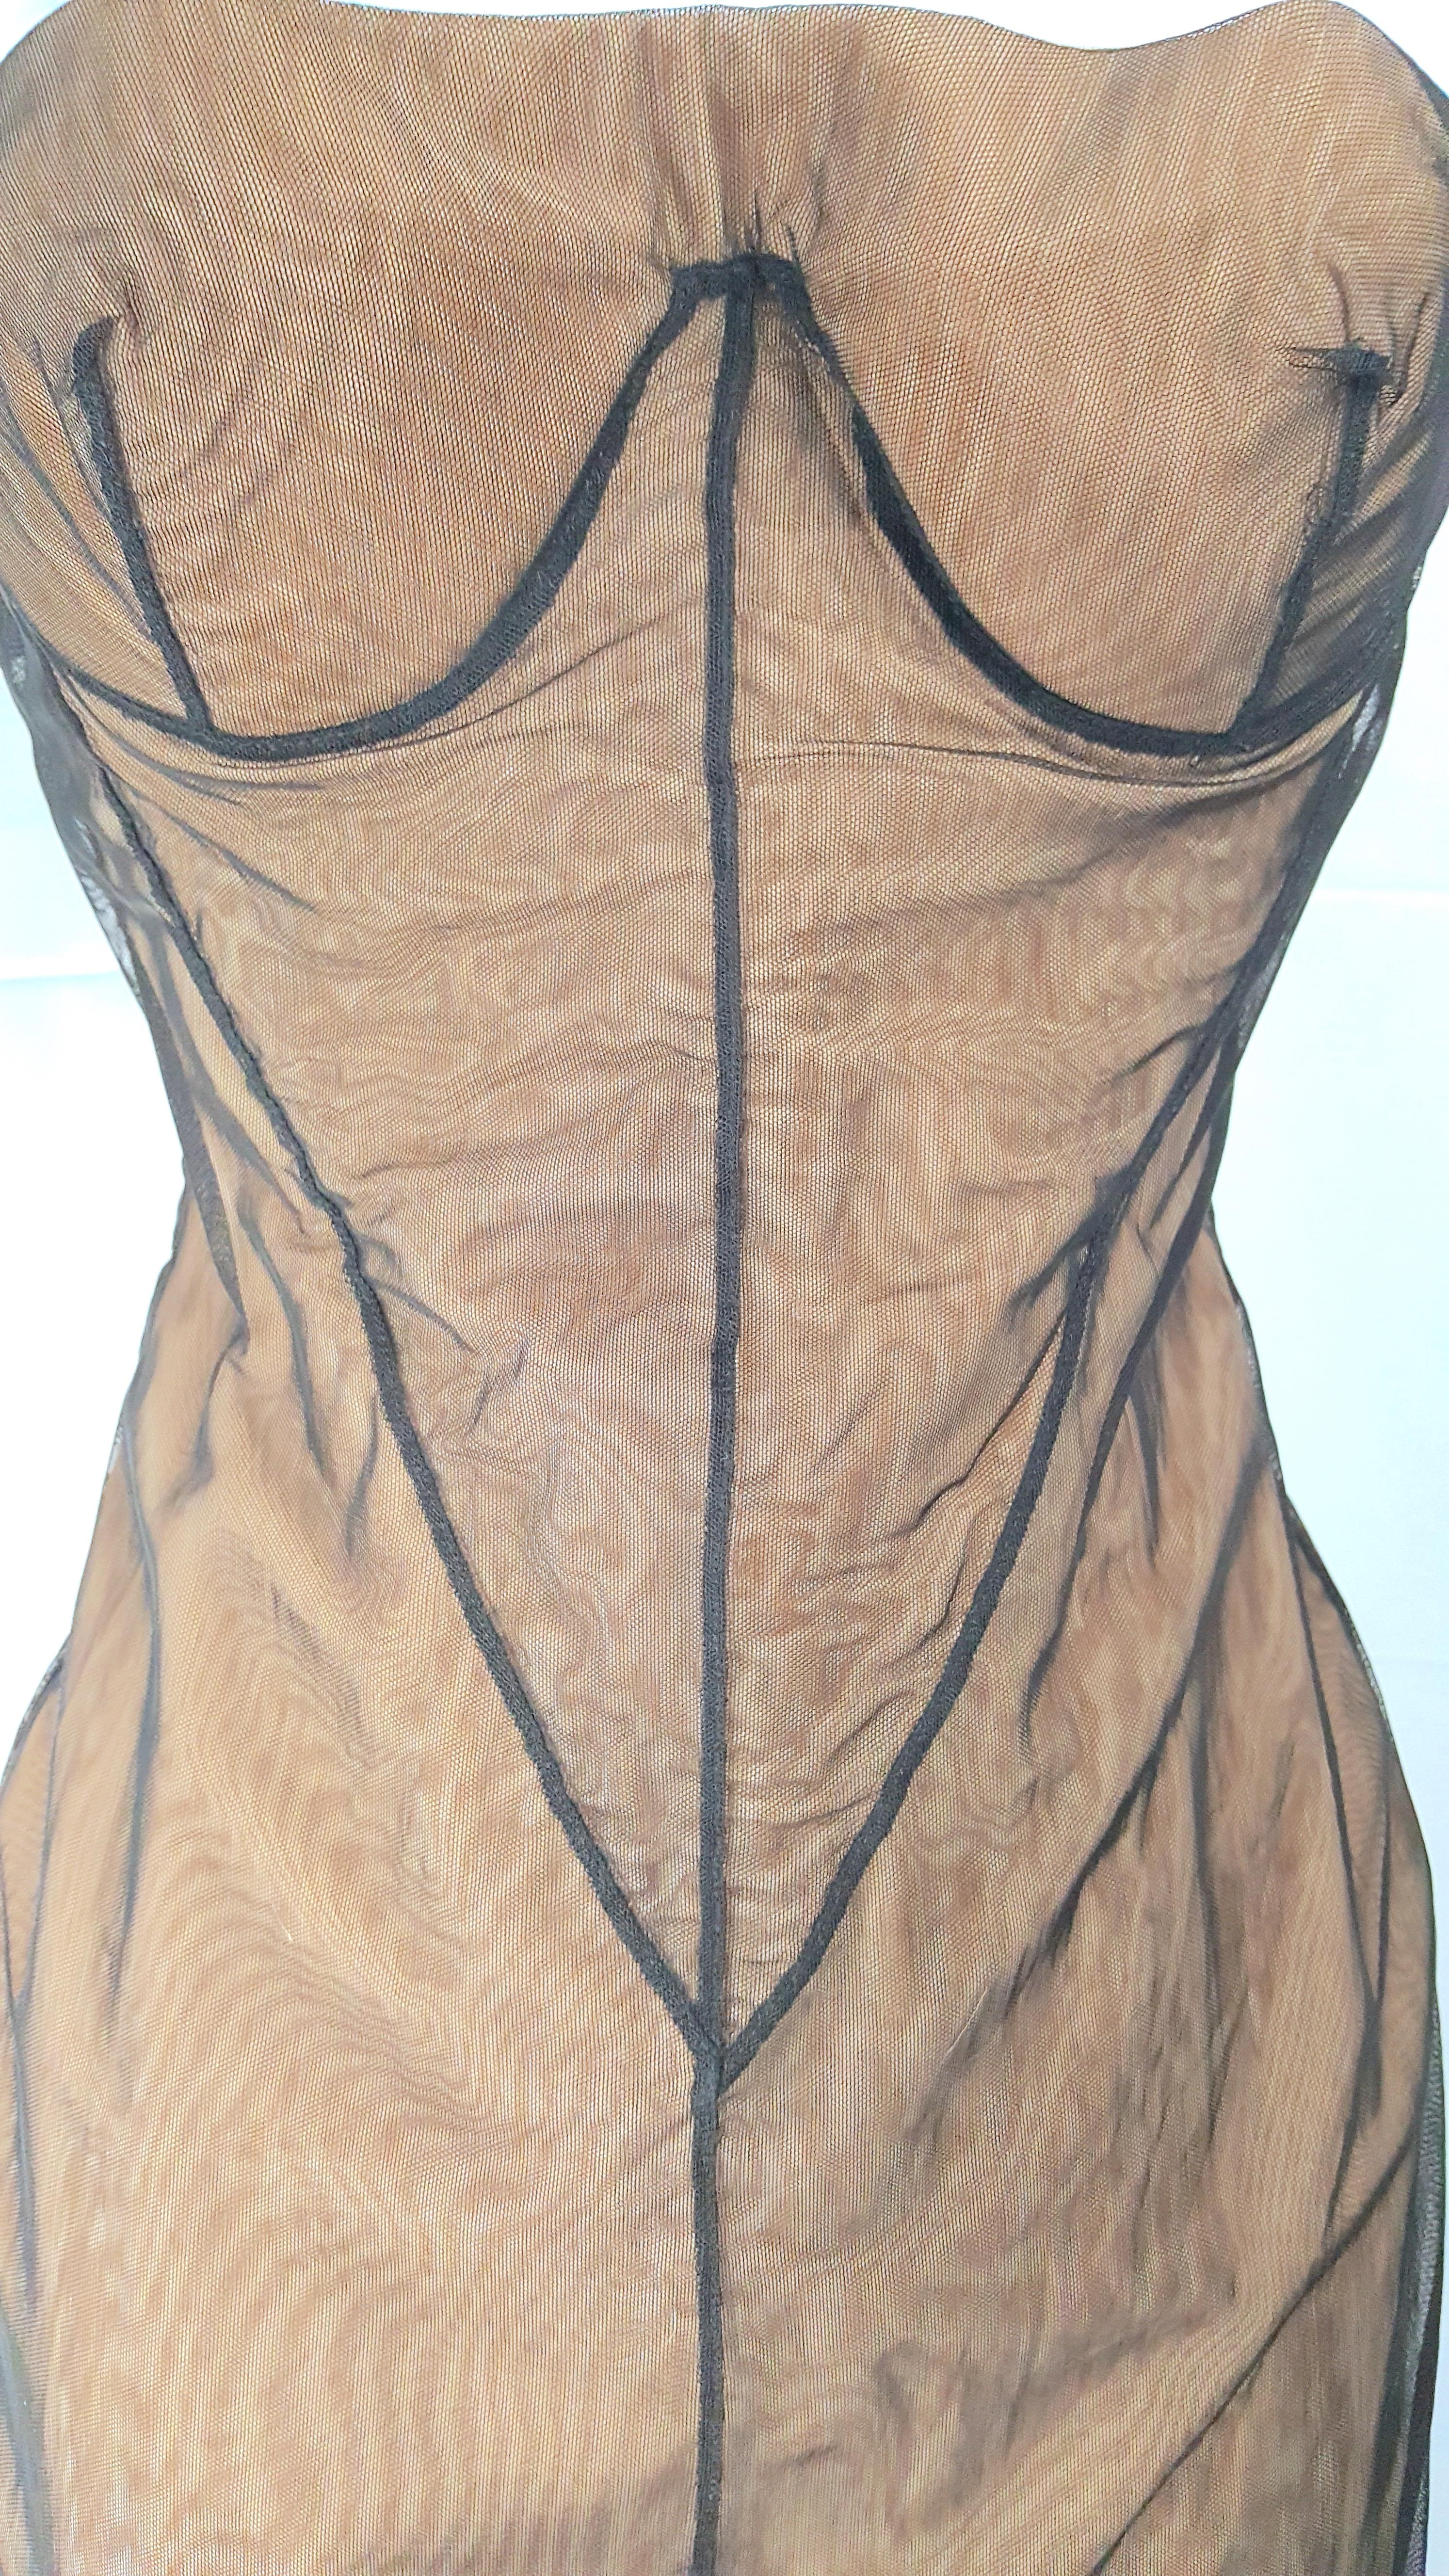 Gucci TomFord 2001 RunwayLook2 Balconette Corset Strapless Tulle AwardYear Dress For Sale 8